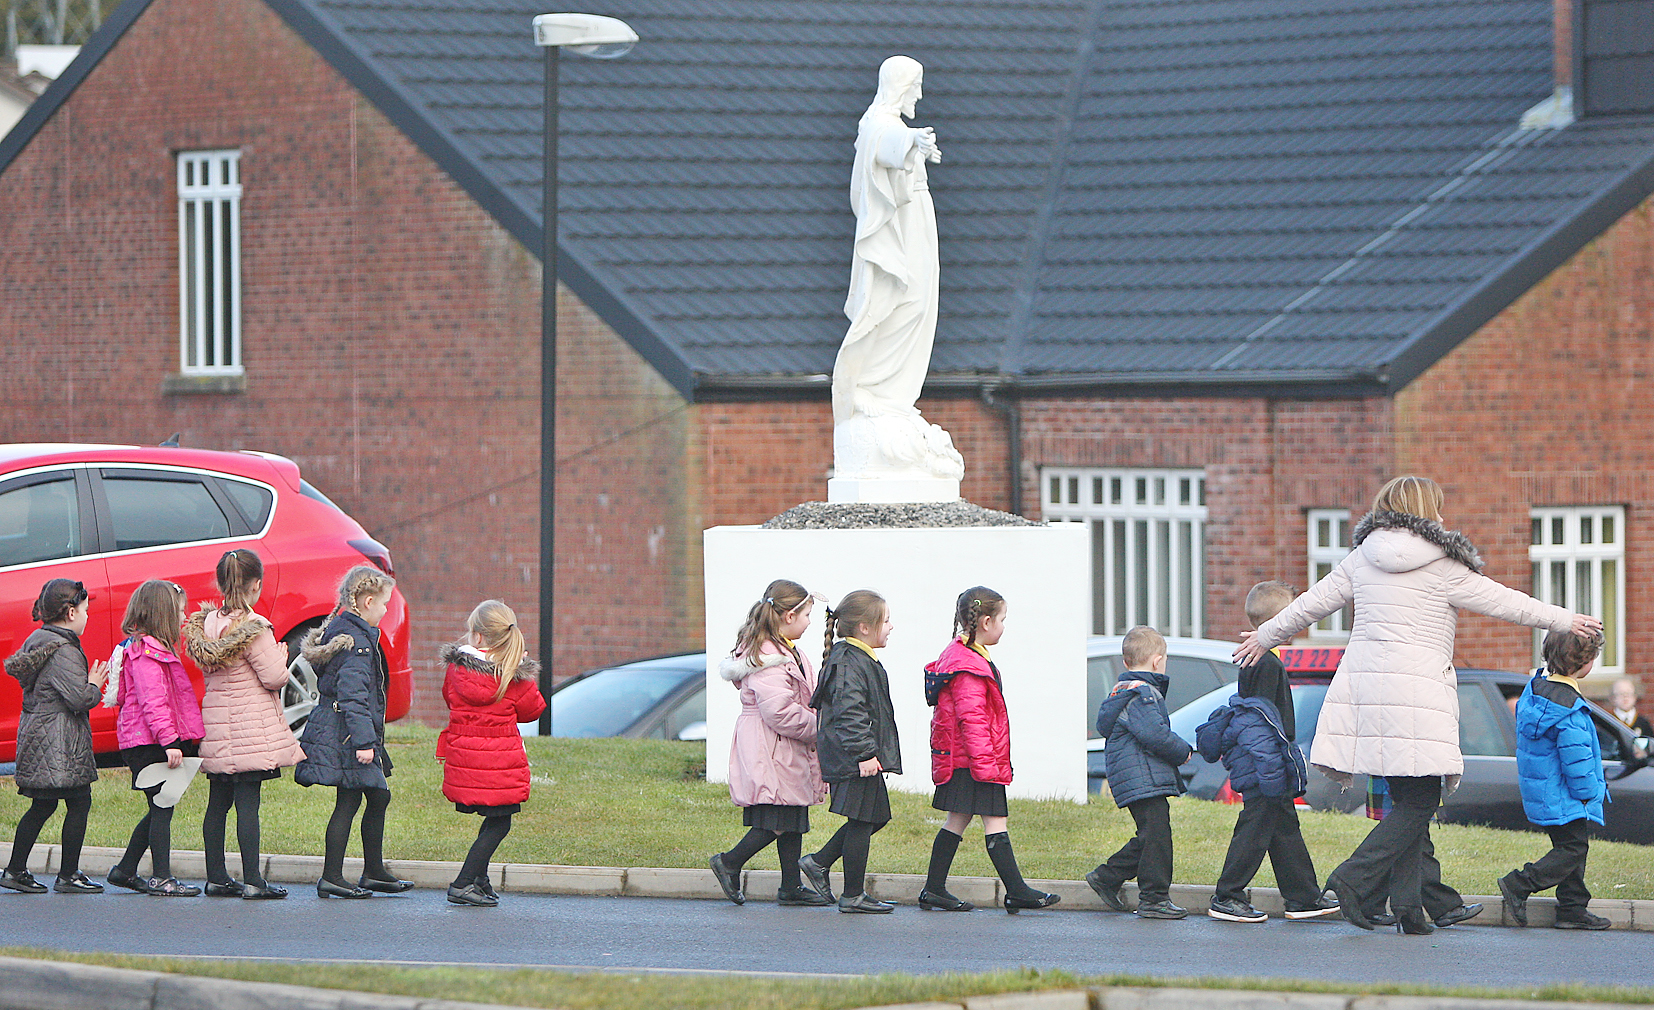 Christ the Redeemer pupils are evacuated during the security alert